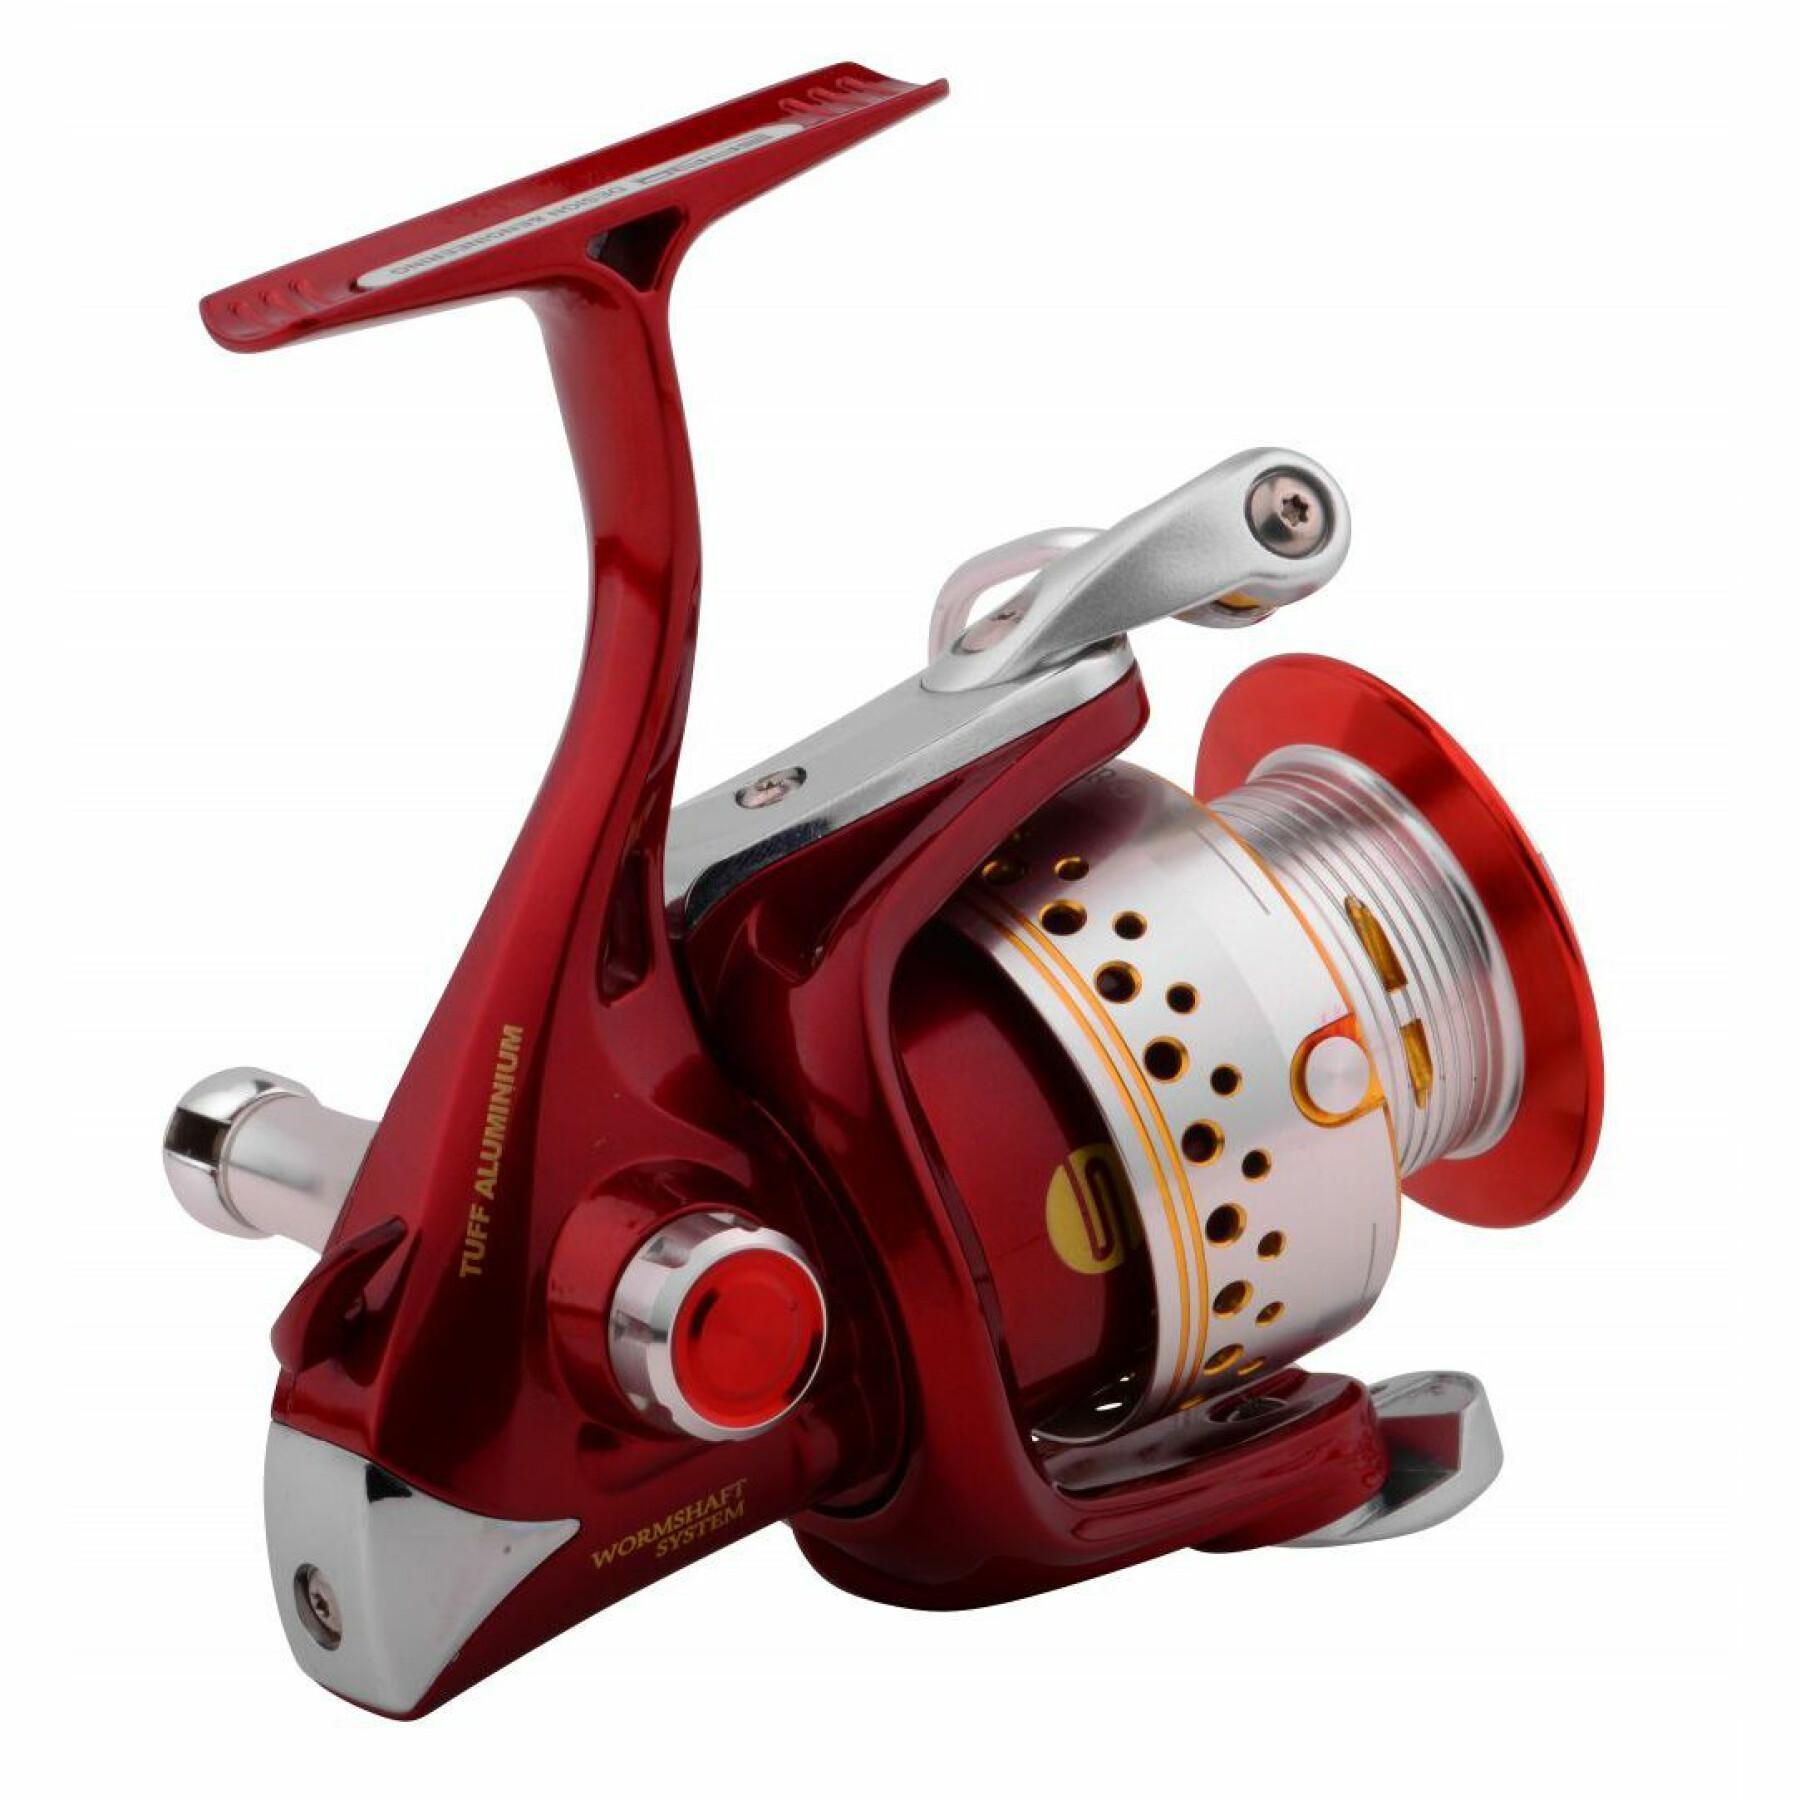 Rulle Spro arc 3000 reel